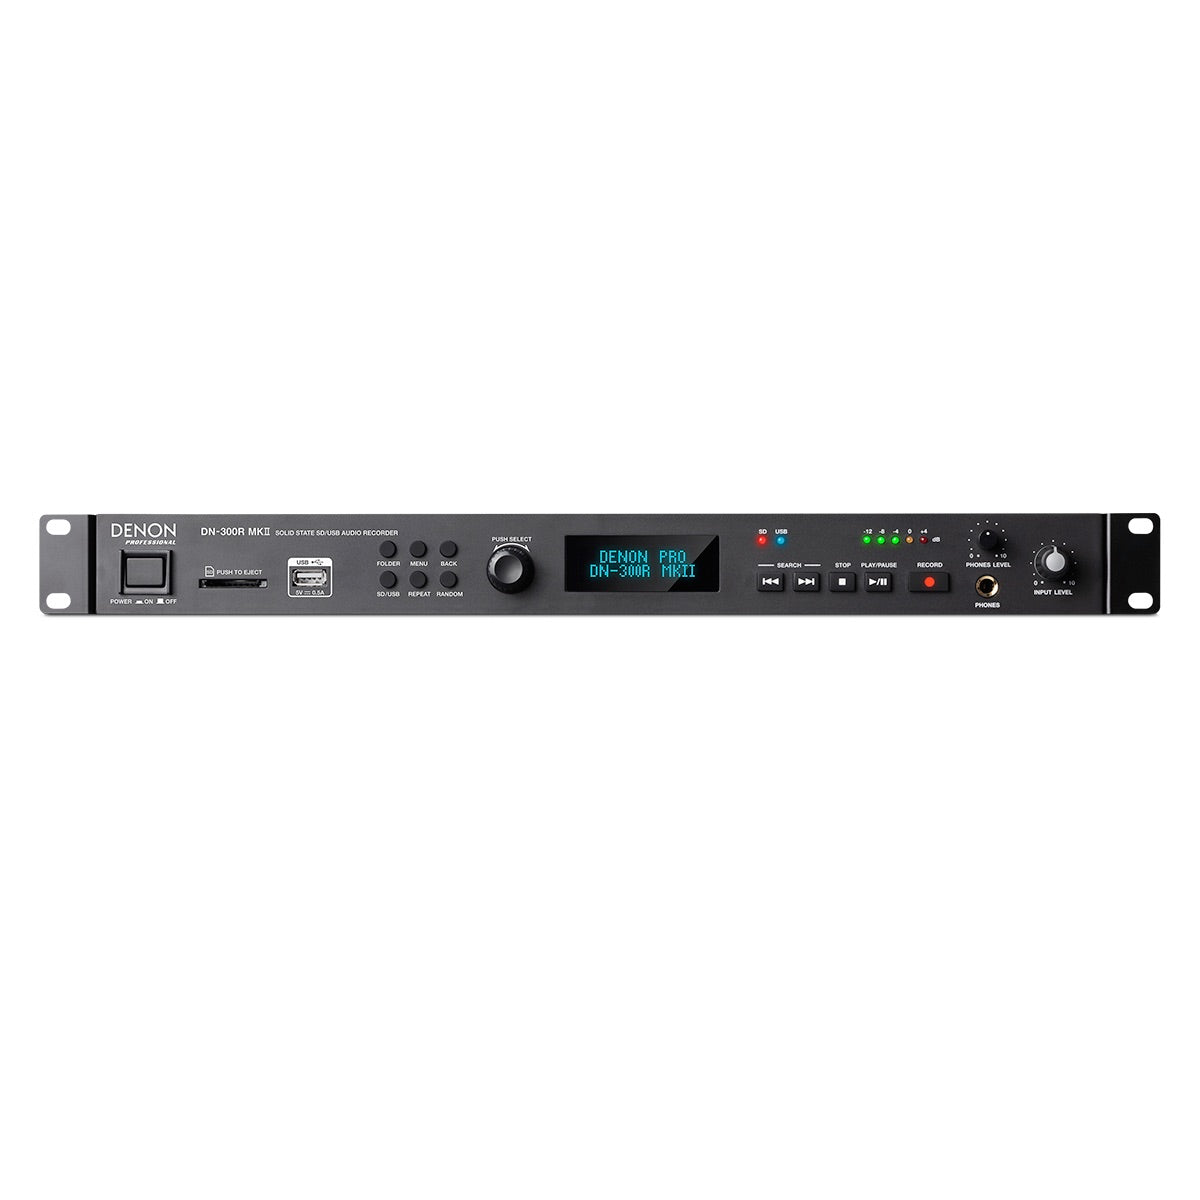 Denon DN-300R MKII Solid-State SD/USB Audio Recorder with XLR Outputs, front